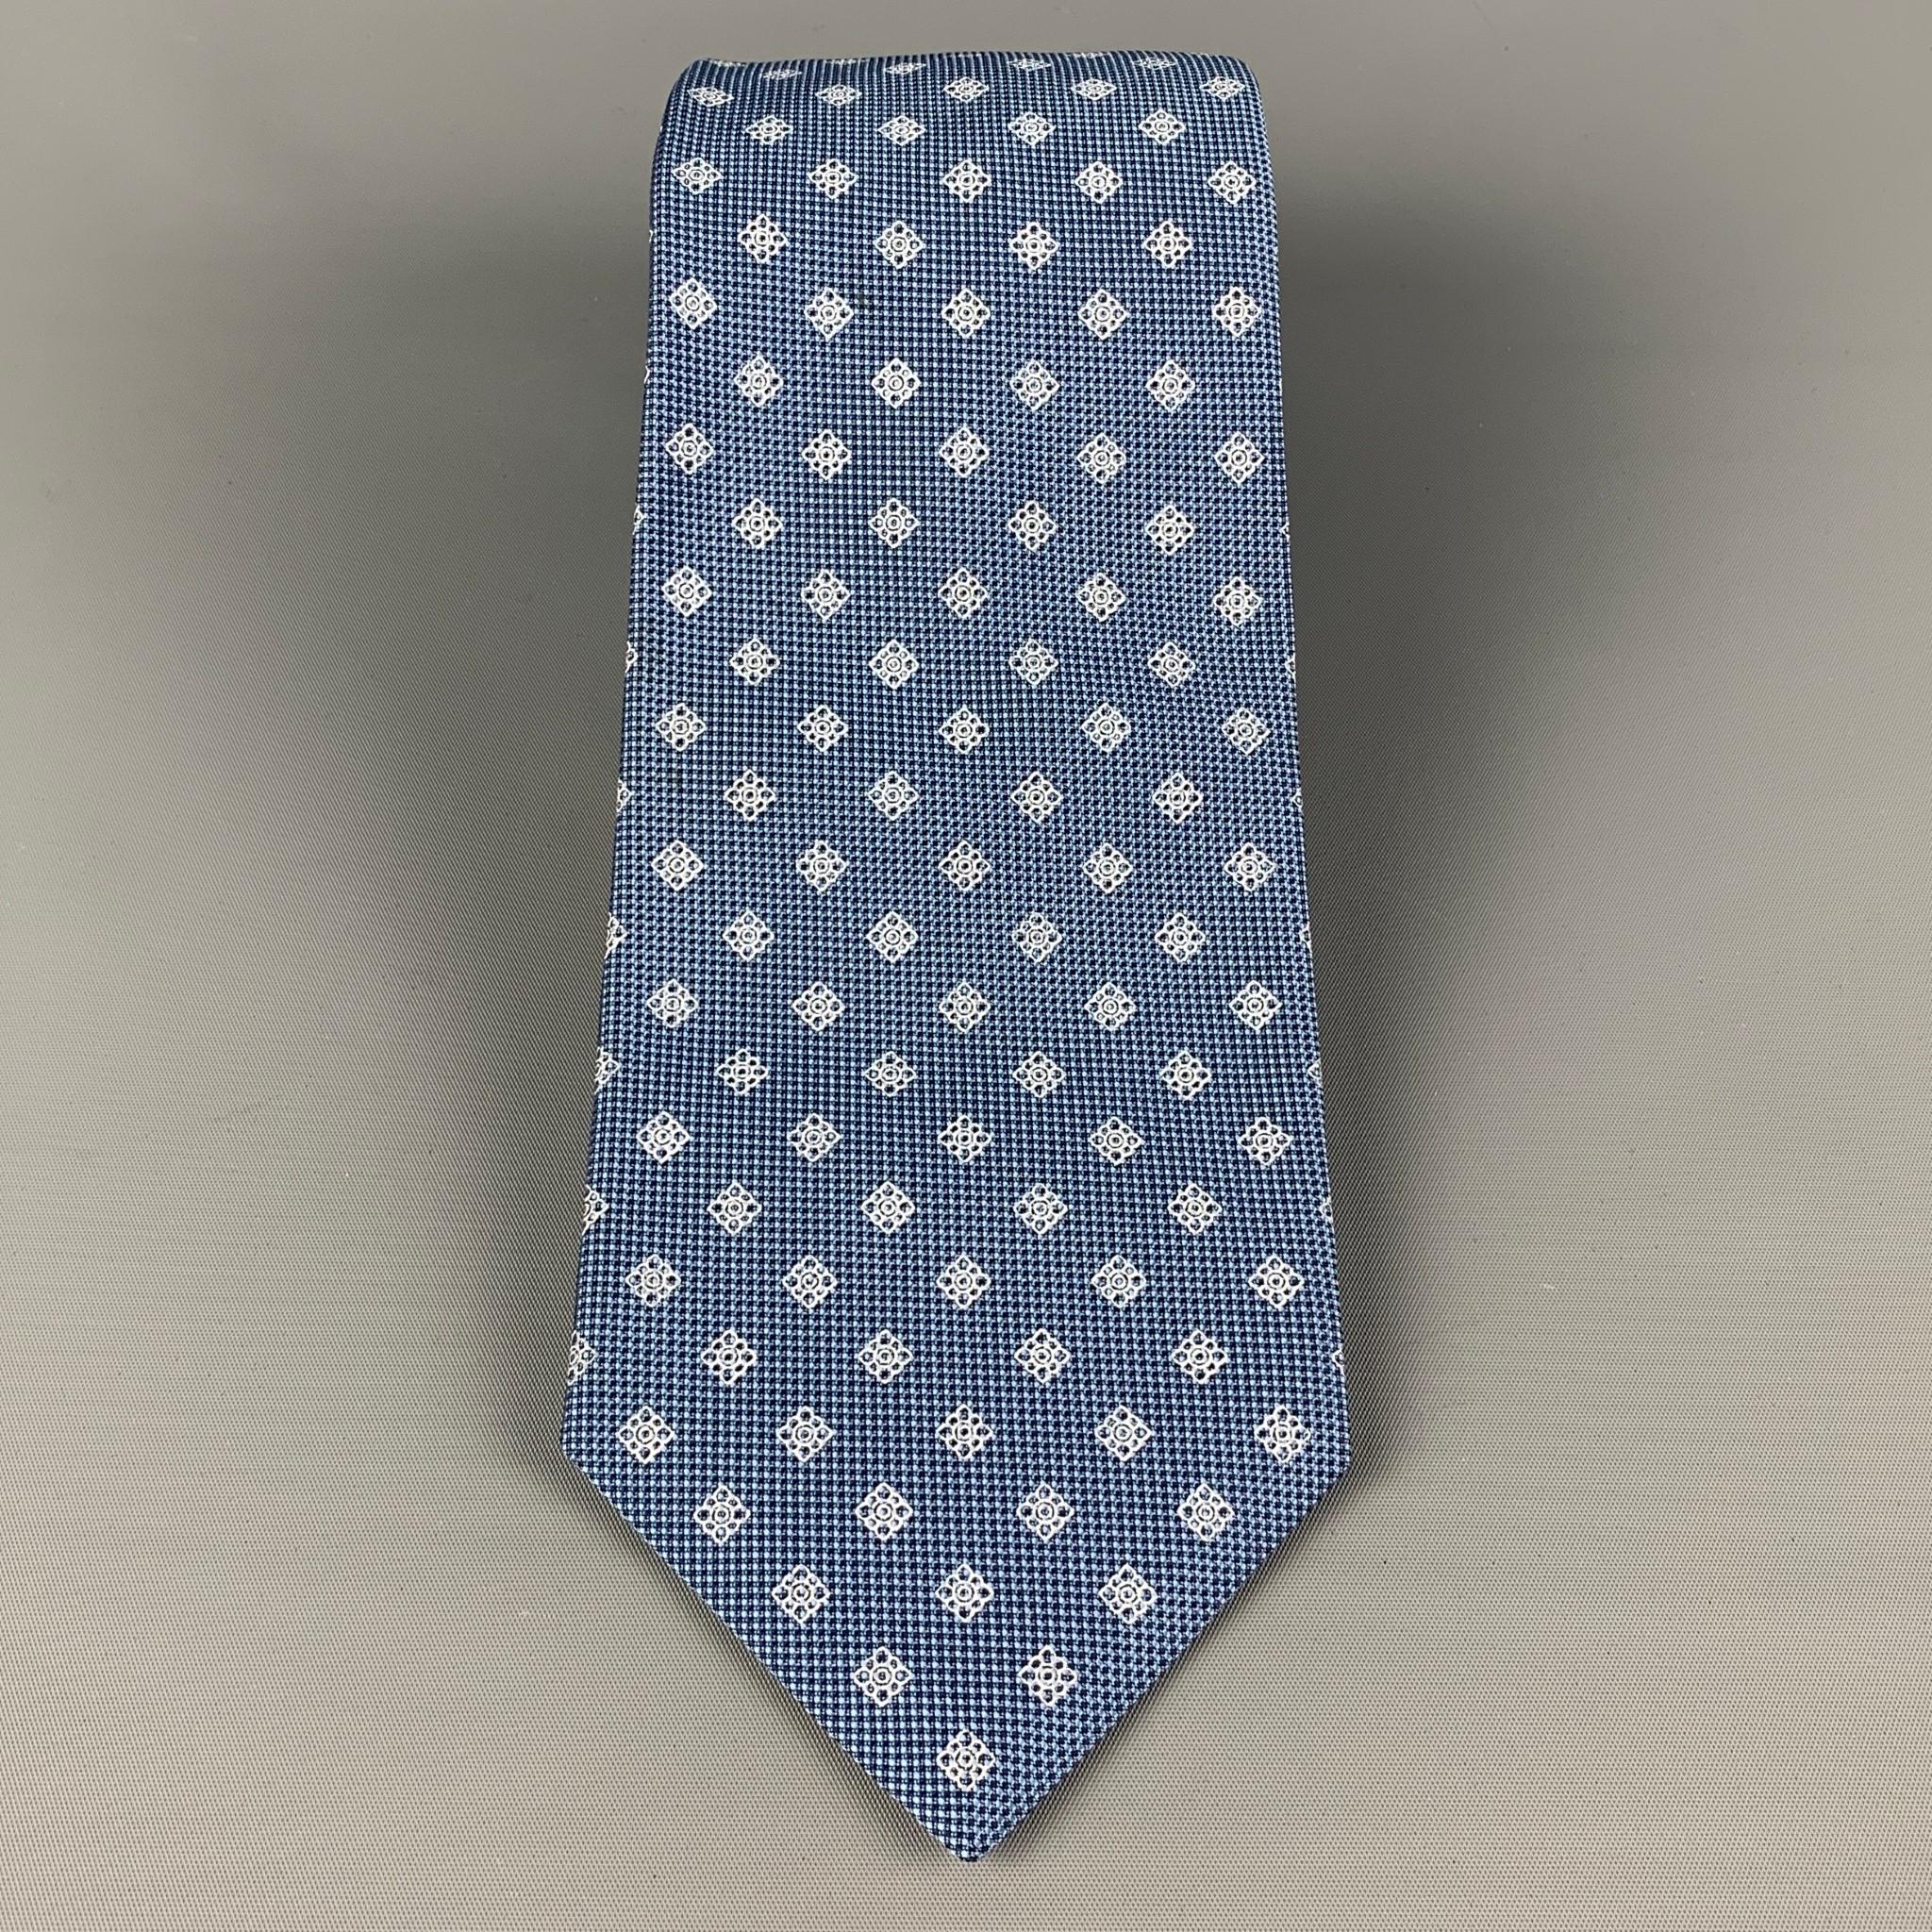 KITON necktie comes in a blue & white silk with a all over rhombus print. Made in Italy .

Very Good Pre-Owned Condition.
Original Retail Price: $345.00

Width: 3.75 in.
Length: 60 in. 